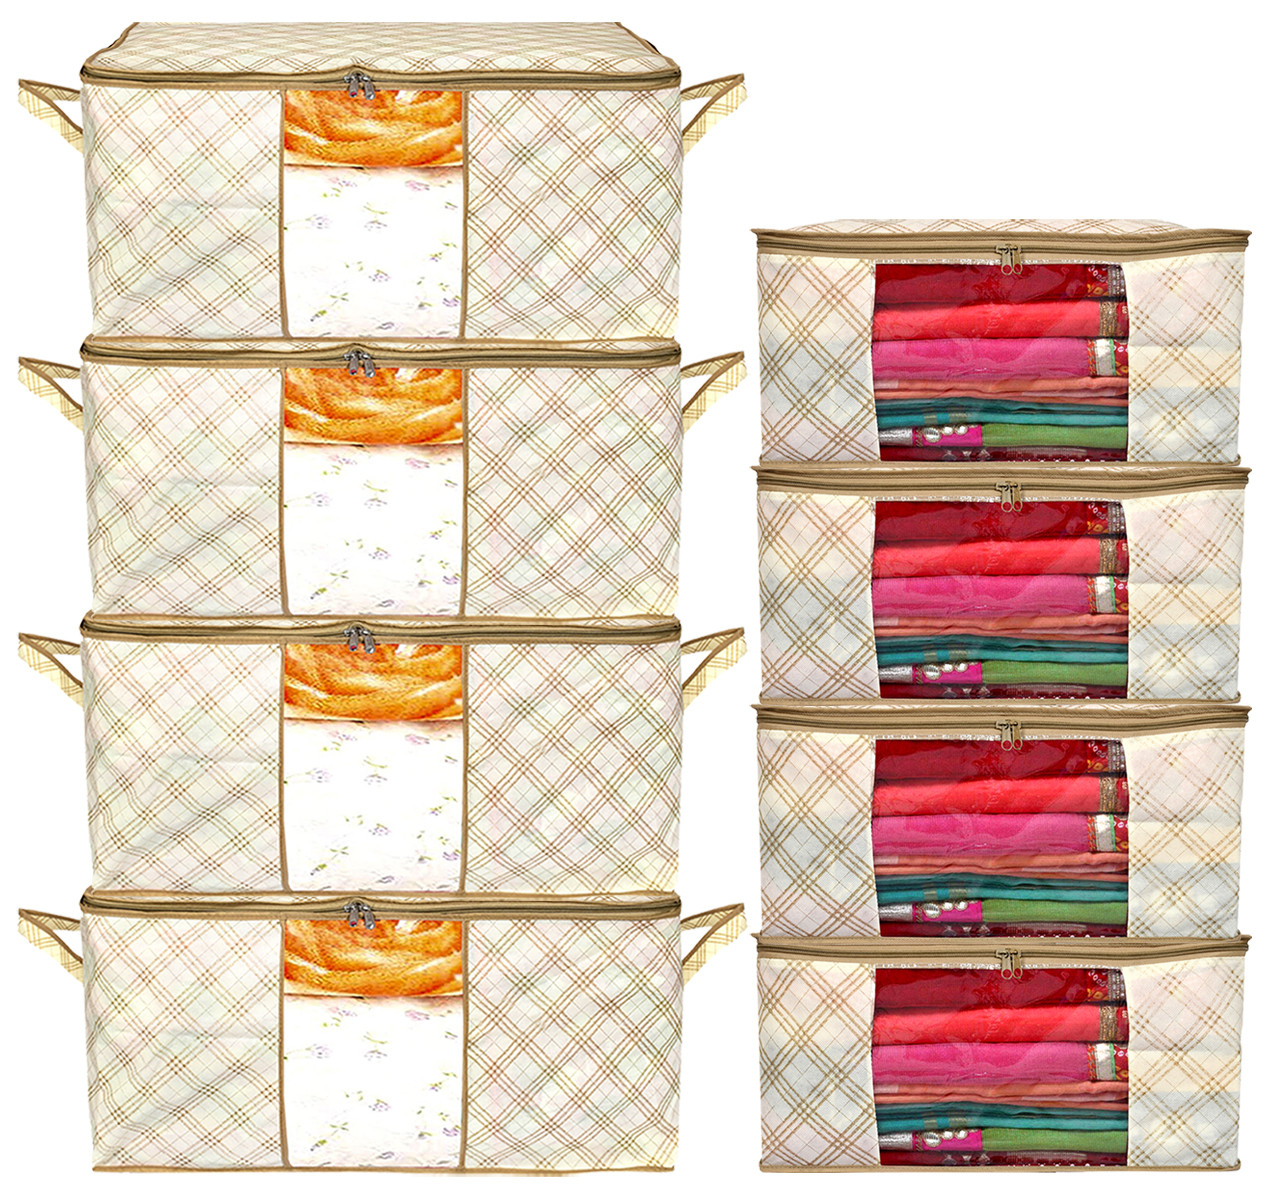 Kuber Industries Metalic Checkered Print Non Woven Saree Cover And Underbed Storage Bag, Storage Organiser, Blanket Cover (Ivory)-34_S_KUBMART16667